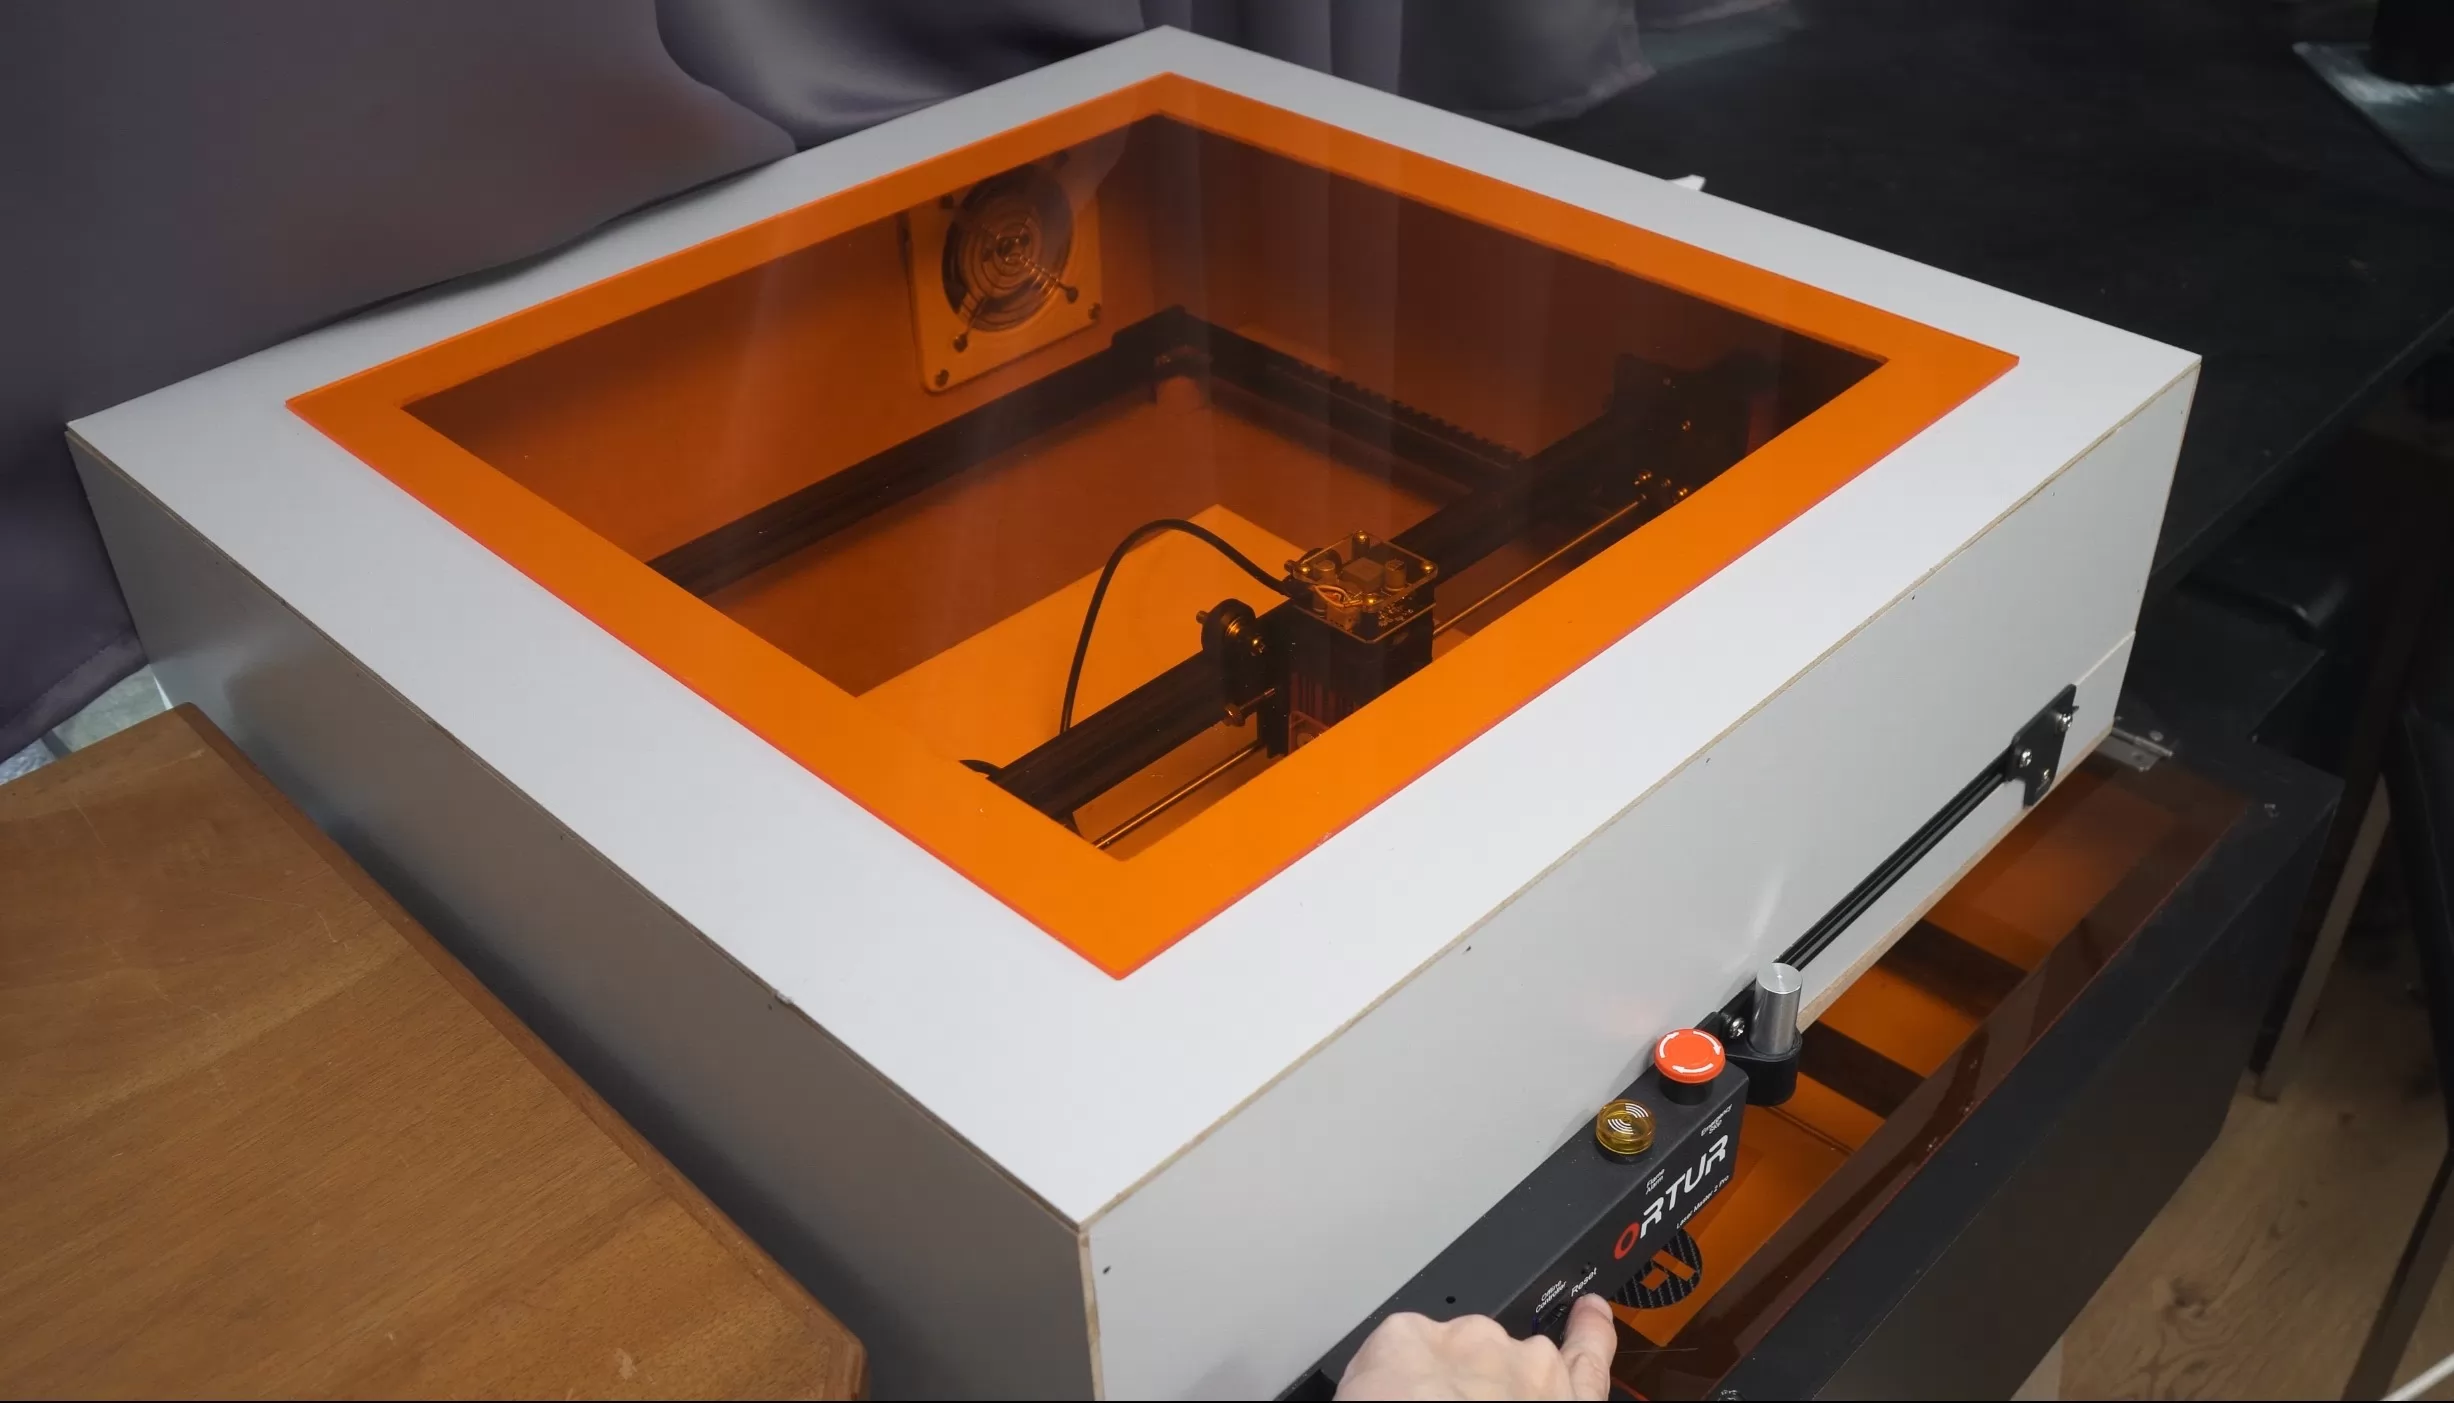 Can You Use Laser Engraver Inside House?